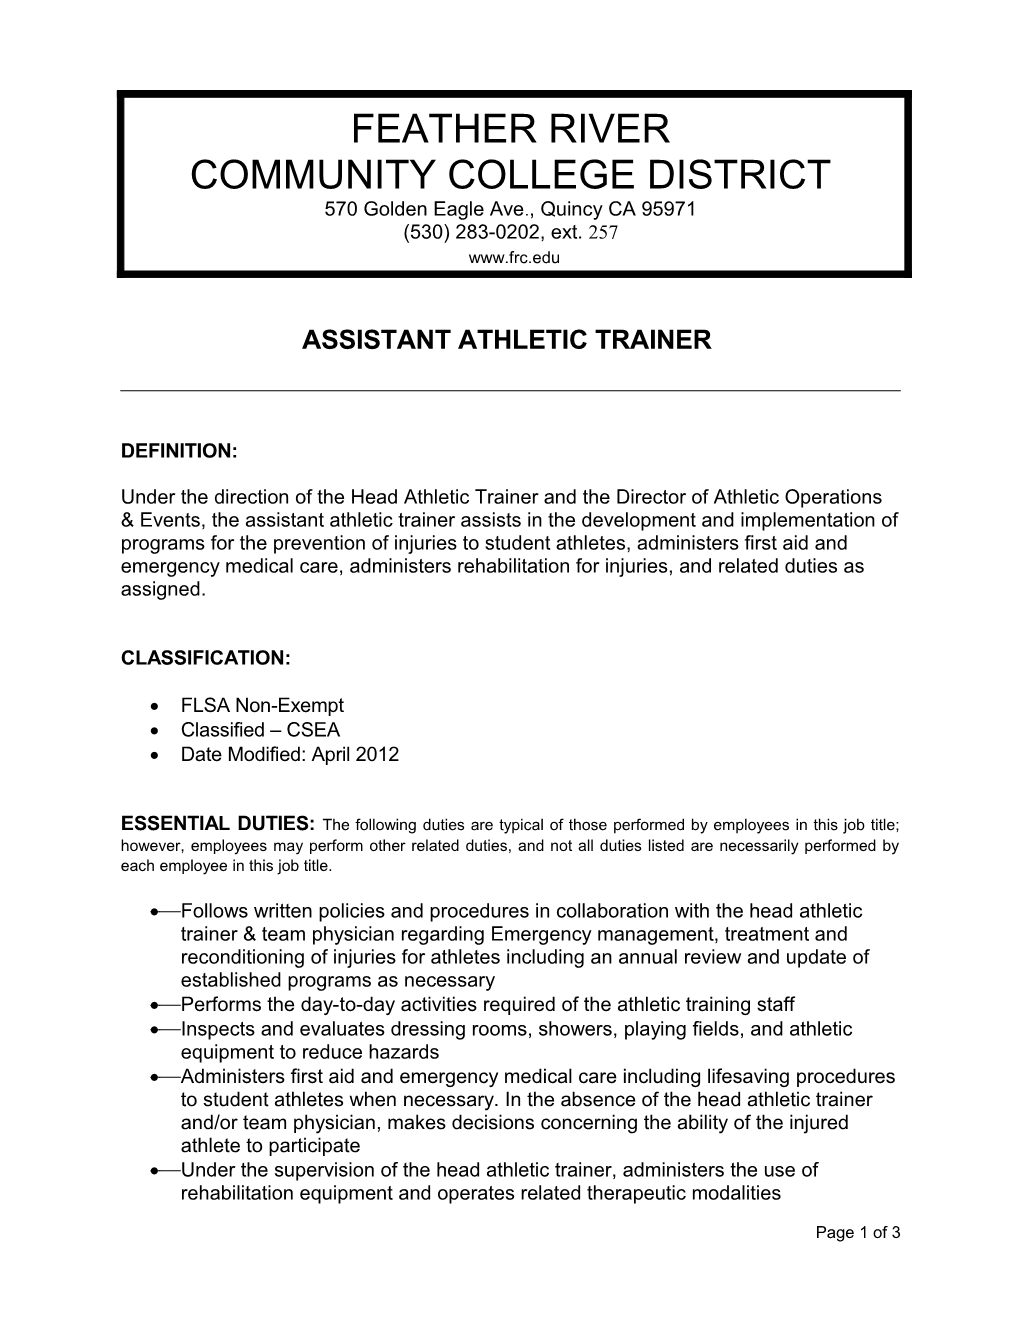 Assistant Athletic Trainer